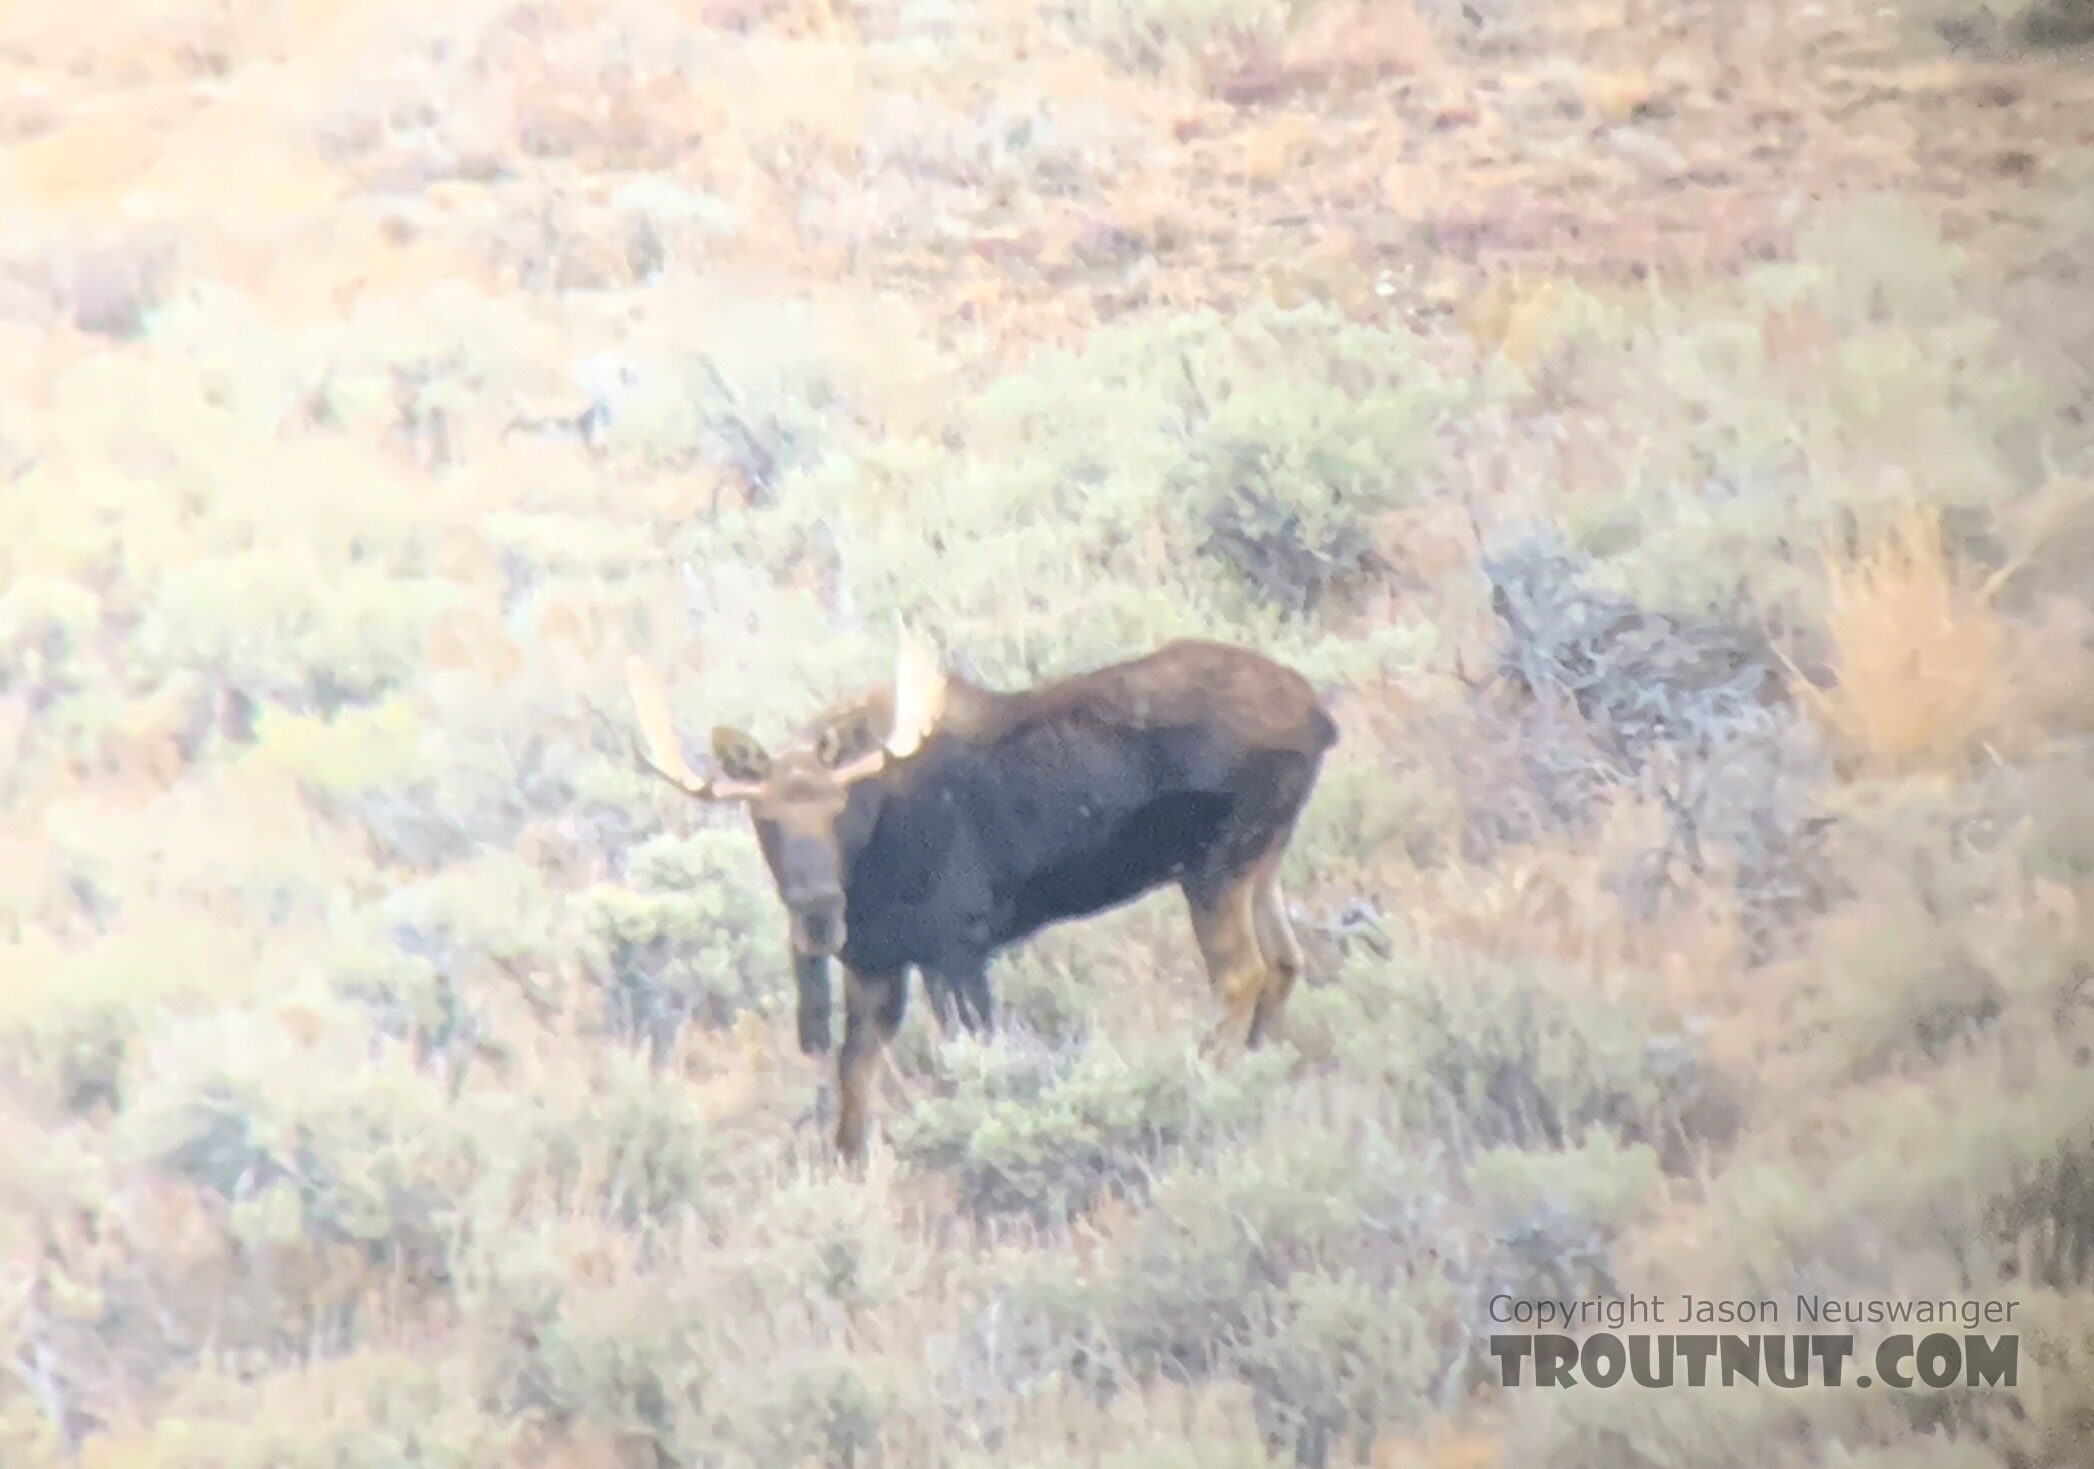 This was the best photo I could get of the moose through my spotting scope with a handheld phone.